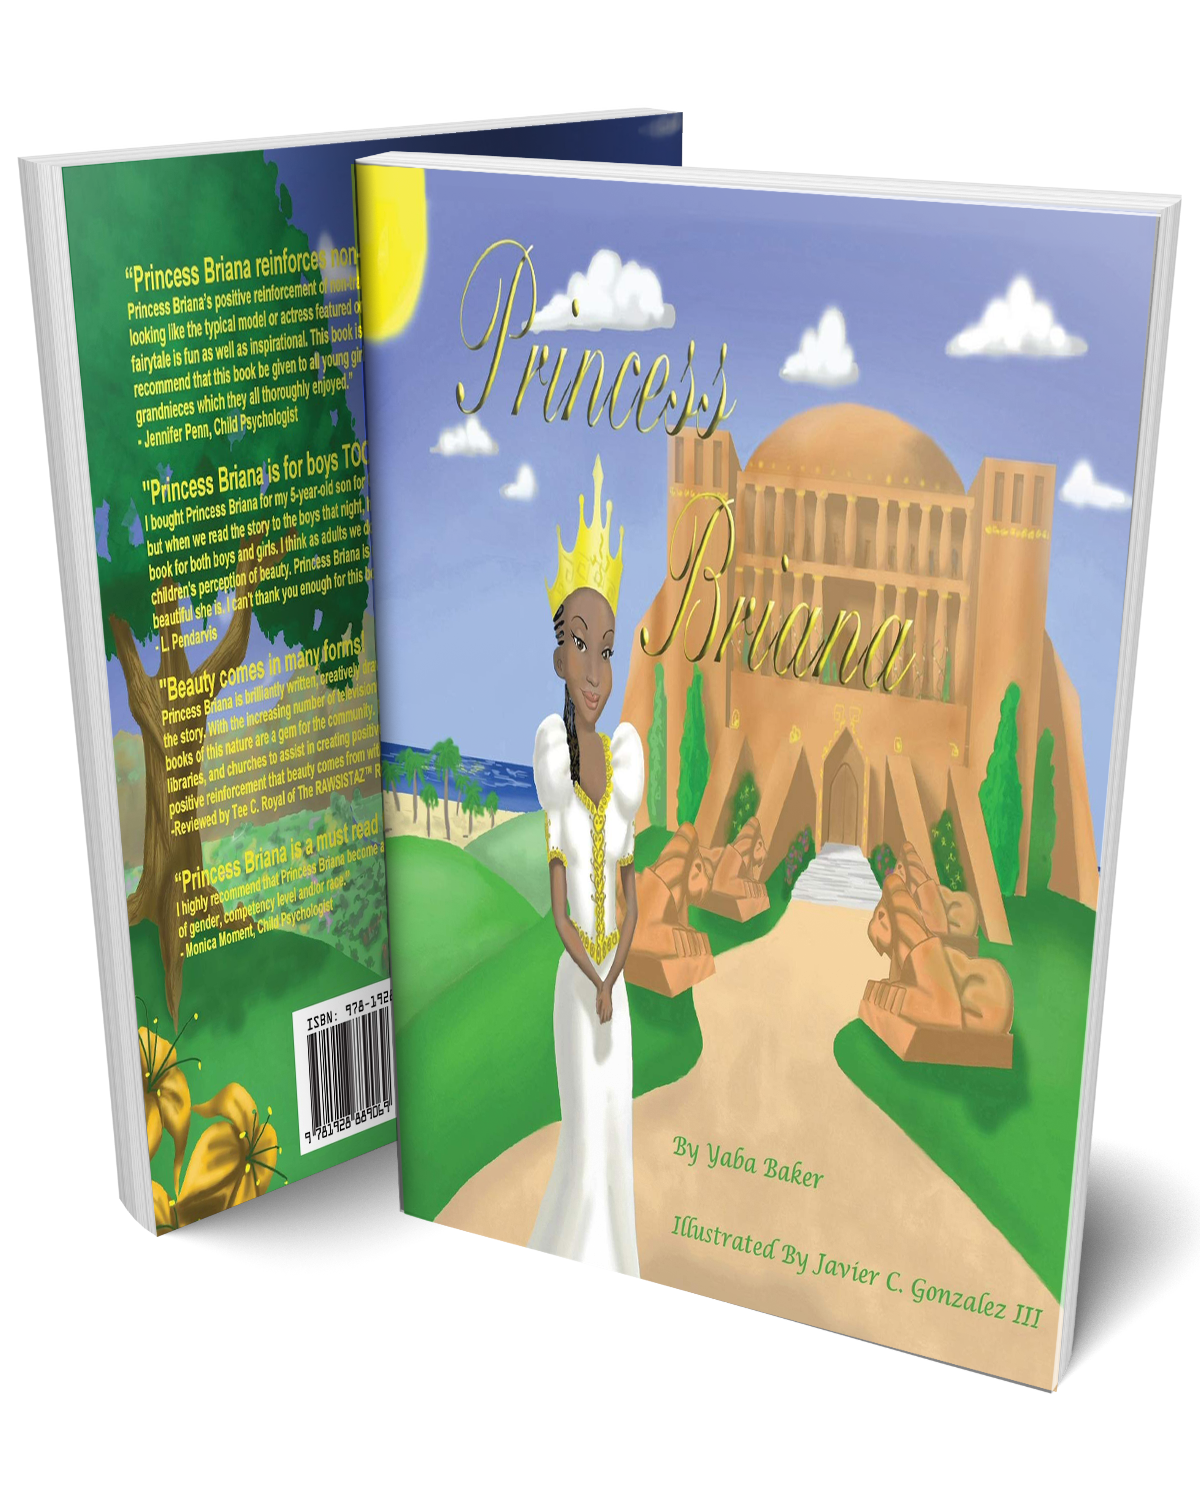 The Princess Briana Book has inspired young girls around the world (Money-back Guarantee)